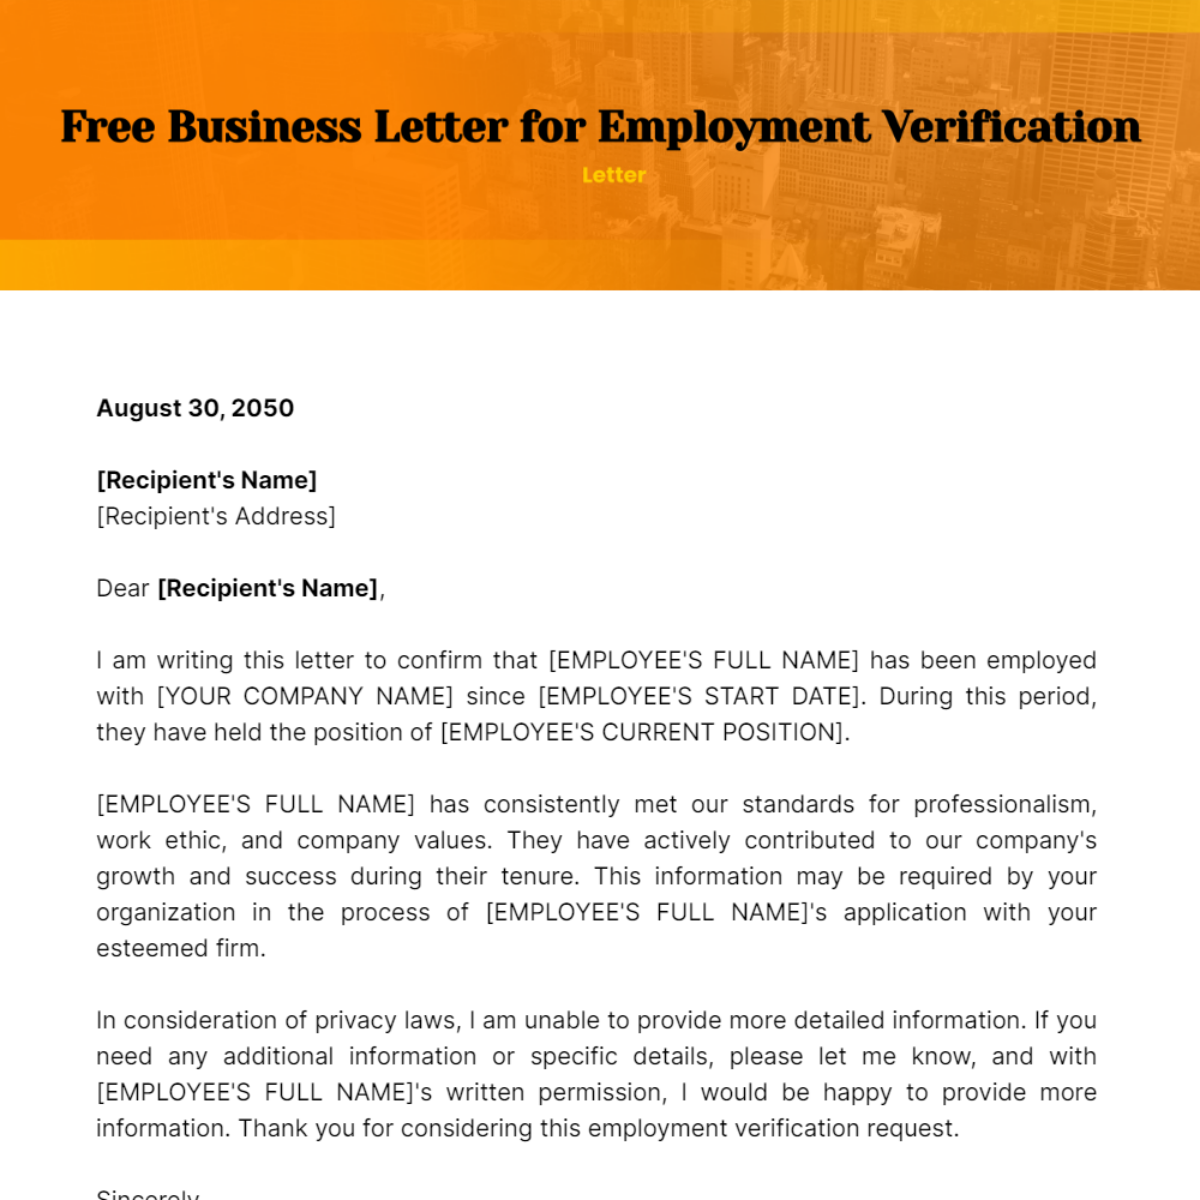 Business Letter for Employment Verification Template